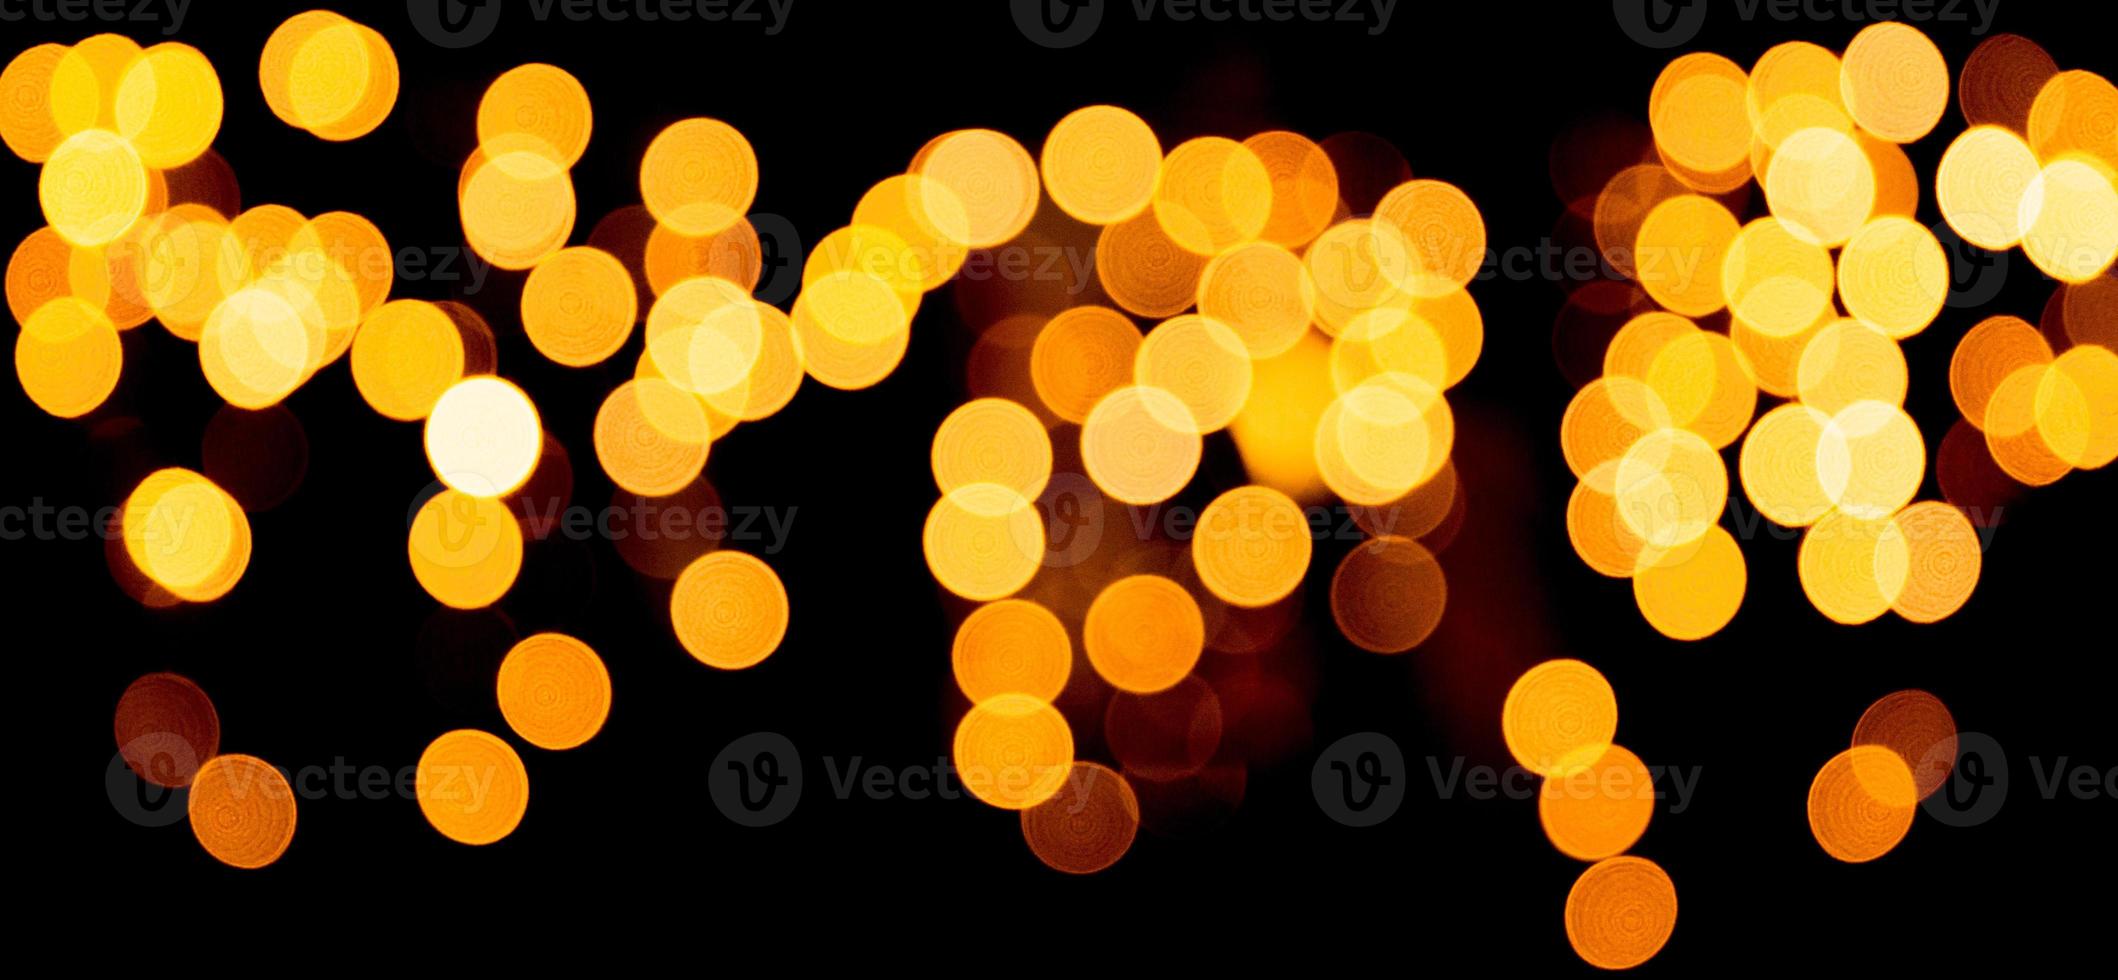 Unfocused abstract gold bokeh on black background. defocused and blurred many round light photo